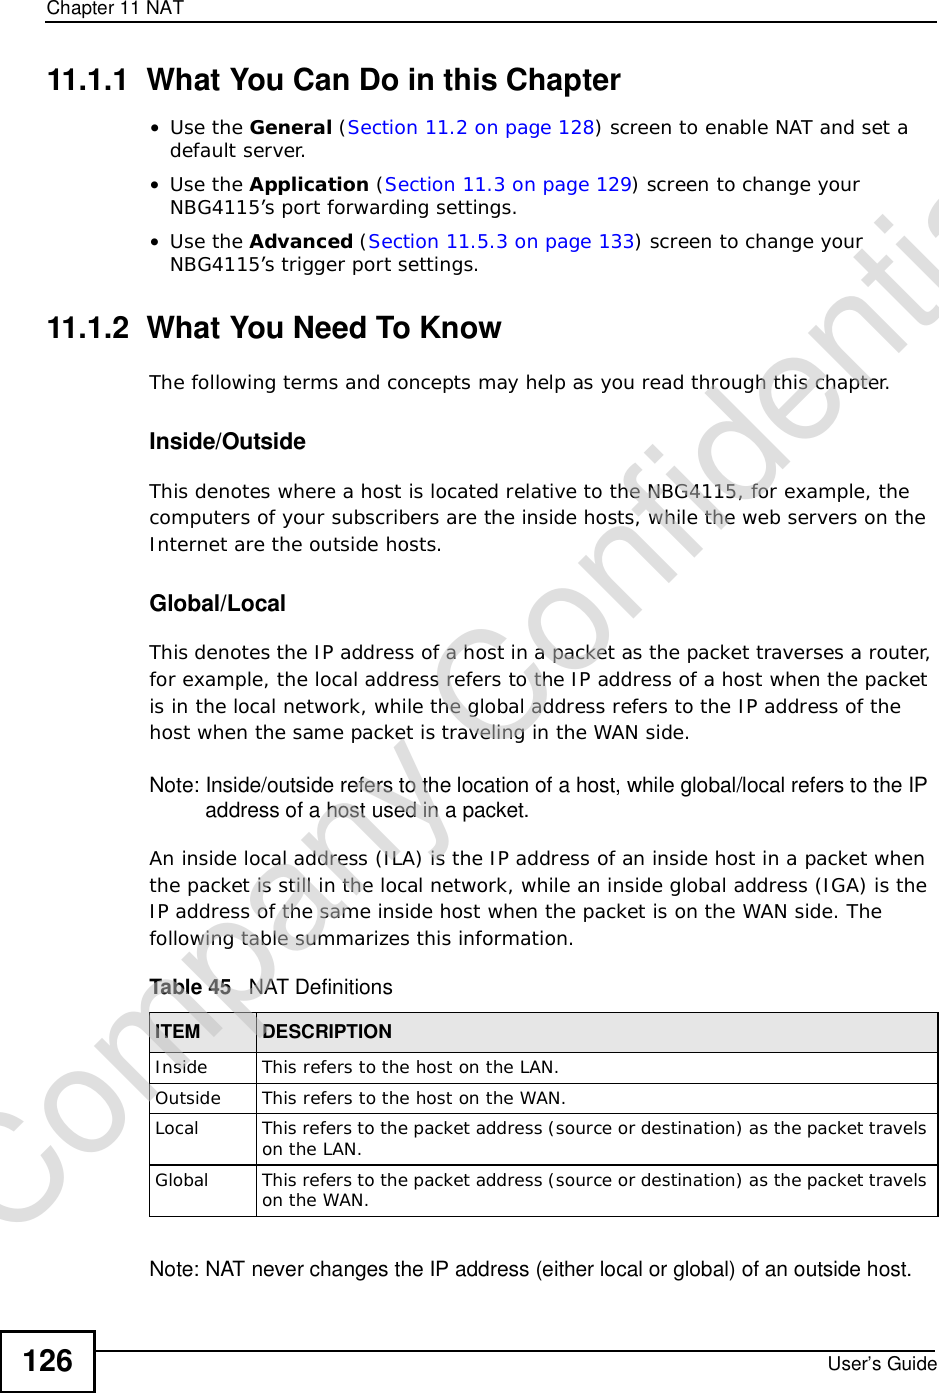 Chapter 11NATUser’s Guide12611.1.1  What You Can Do in this Chapter•Use the General (Section 11.2 on page 128) screen to enable NAT and set a default server.•Use the Application (Section 11.3 on page 129) screen to change your NBG4115’s port forwarding settings.•Use the Advanced (Section 11.5.3 on page 133) screen to change your NBG4115’s trigger port settings.11.1.2  What You Need To KnowThe following terms and concepts may help as you read through this chapter.Inside/OutsideThis denotes where a host is located relative to the NBG4115, for example, the computers of your subscribers are the inside hosts, while the web servers on the Internet are the outside hosts. Global/LocalThis denotes the IP address of a host in a packet as the packet traverses a router, for example, the local address refers to the IP address of a host when the packet is in the local network, while the global address refers to the IP address of the host when the same packet is traveling in the WAN side. Note: Inside/outside refers to the location of a host, while global/local refers to the IP address of a host used in a packet. An inside local address (ILA) is the IP address of an inside host in a packet when the packet is still in the local network, while an inside global address (IGA) is the IP address of the same inside host when the packet is on the WAN side. The following table summarizes this information.Note: NAT never changes the IP address (either local or global) of an outside host.Table 45   NAT DefinitionsITEM DESCRIPTIONInside This refers to the host on the LAN.Outside This refers to the host on the WAN.Local This refers to the packet address (source or destination) as the packet travels on the LAN.Global This refers to the packet address (source or destination) as the packet travels on the WAN.Company Confidential